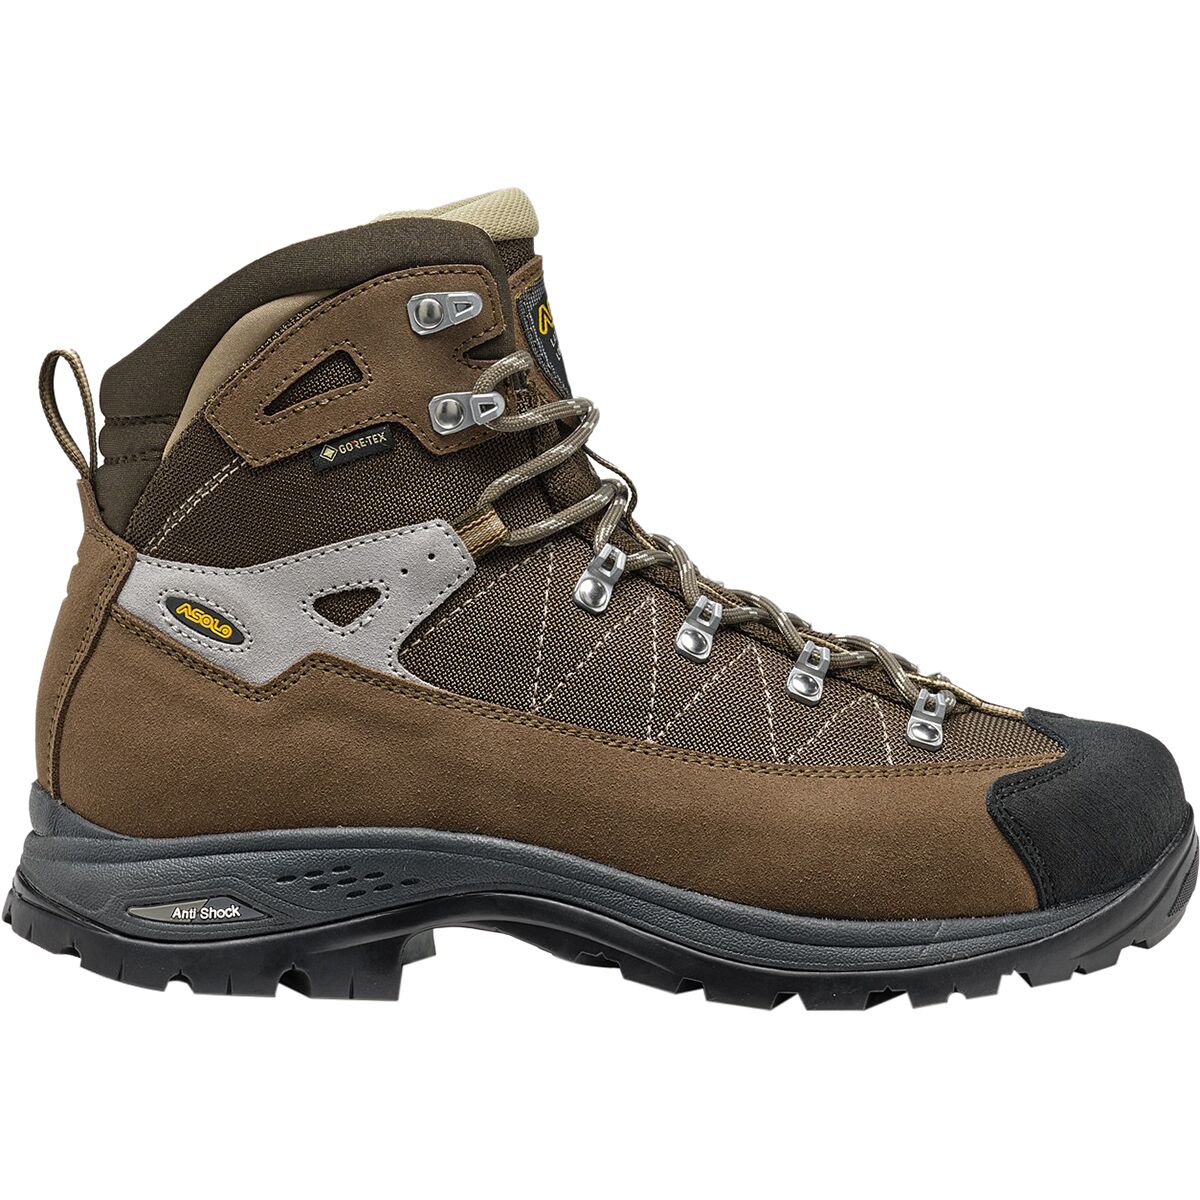 Asolo Finder GV Hiking Boot - Men's